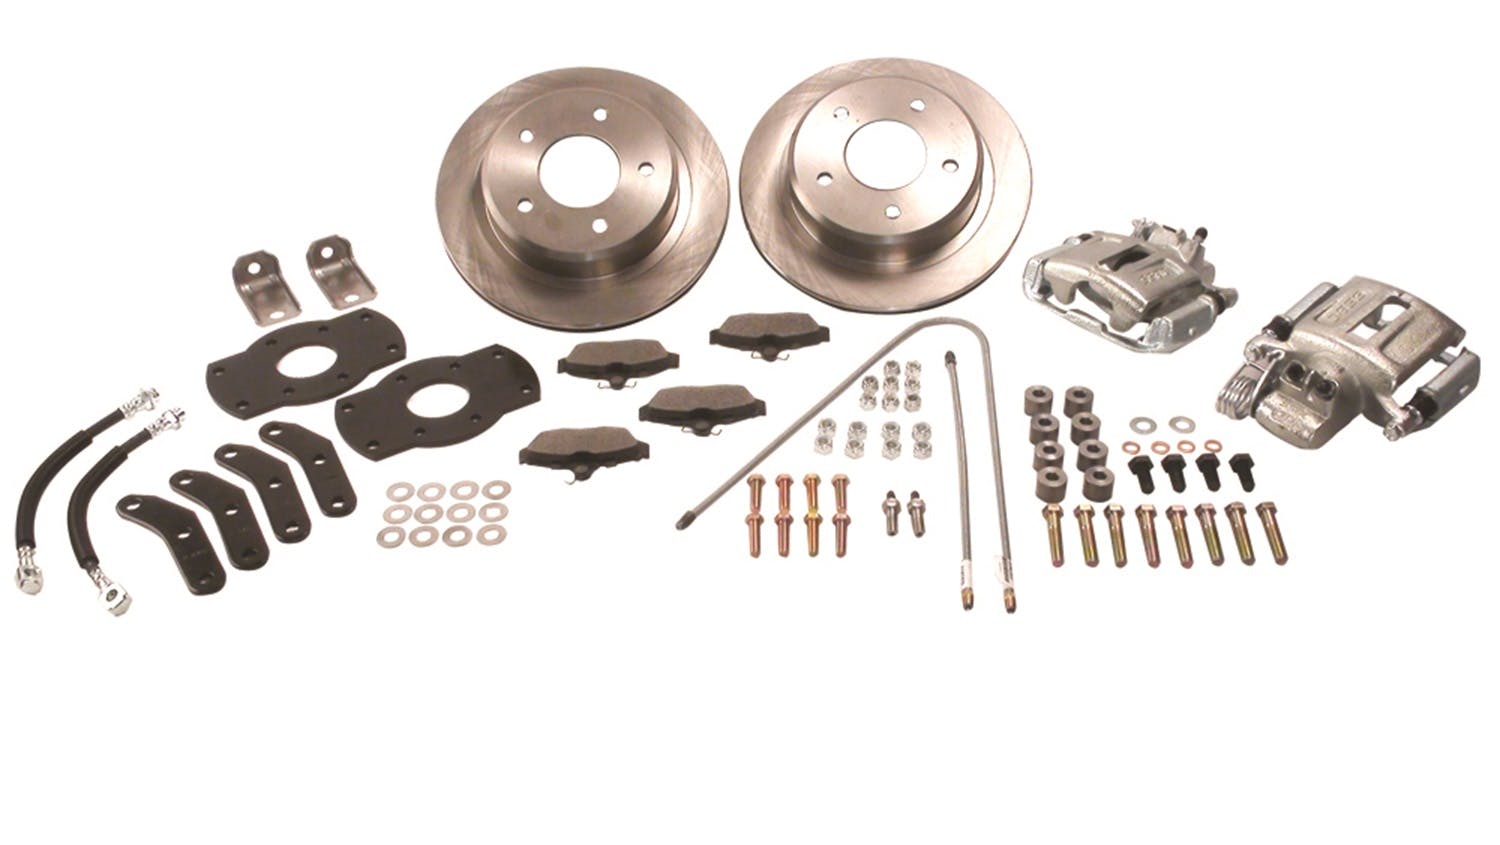 Stainless Steel Brakes A158-1R Kit A158-1 w/red calipers